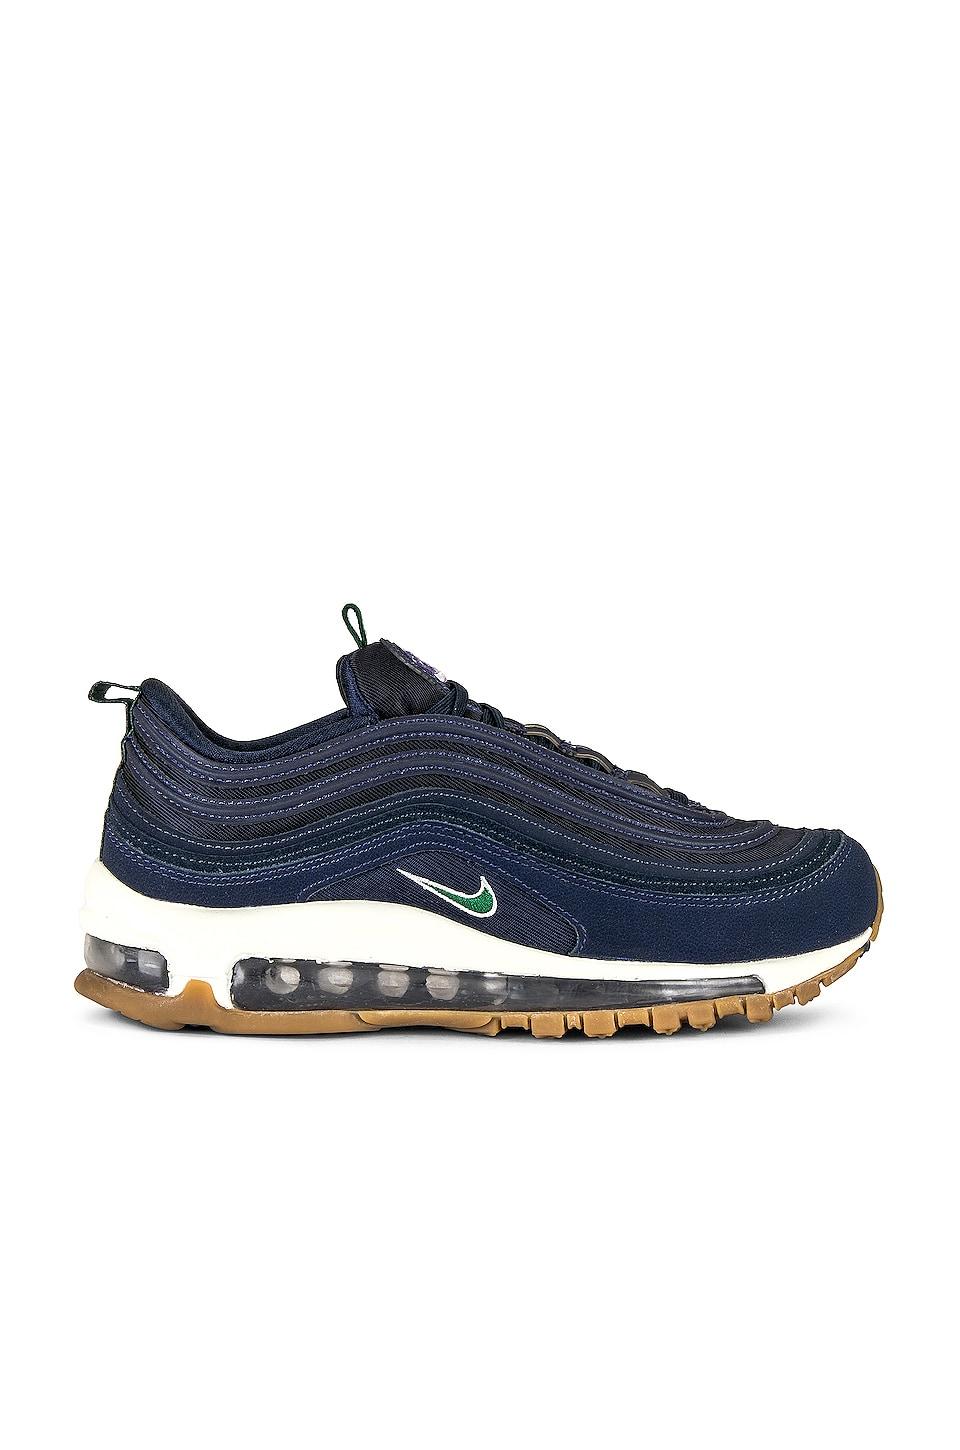 Nike Air Max 97 Shoes in Blue | Lyst